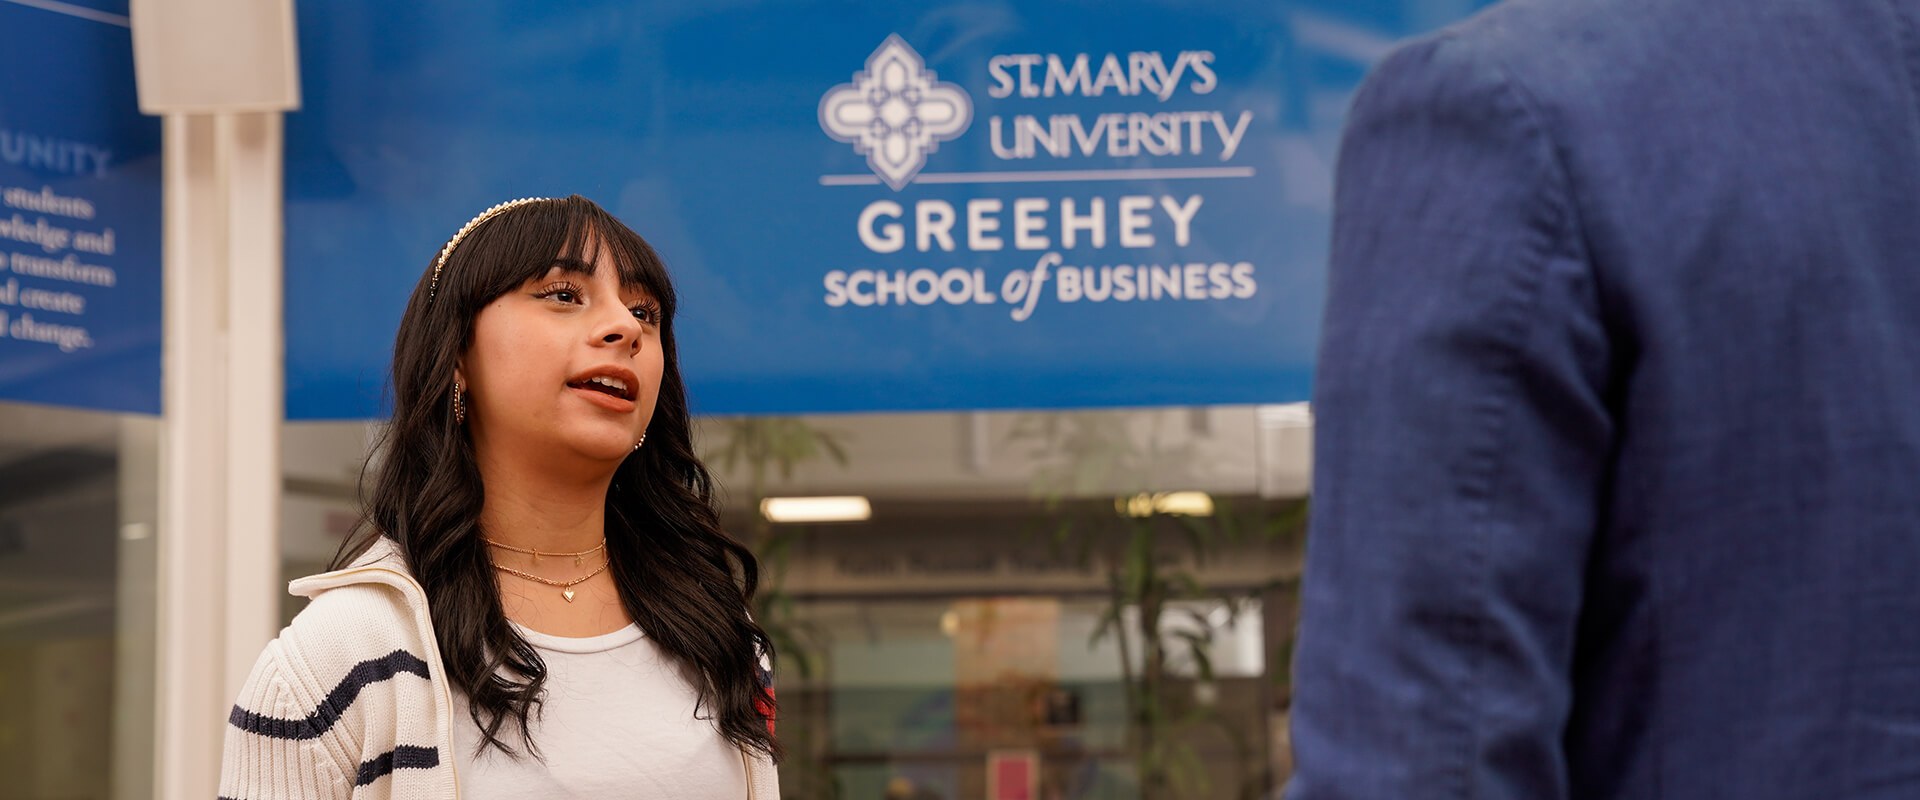 A student speaks to a professor with a Greehey School of Business sign behind her.